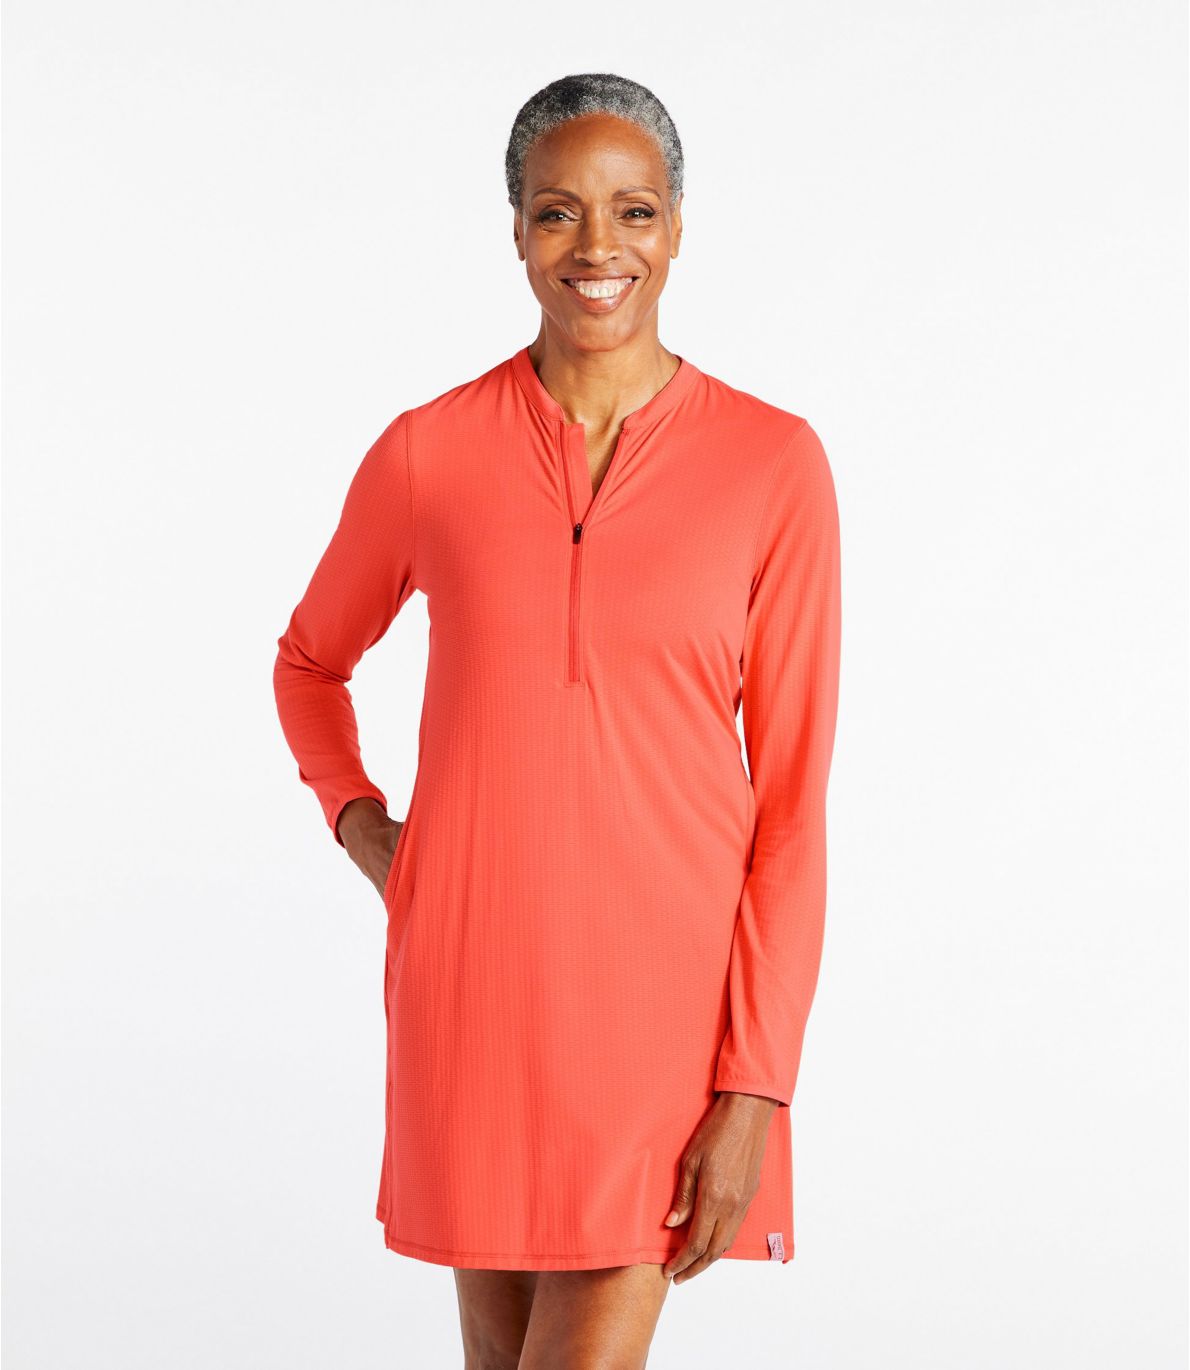 Women's Sand Beach Cover-Up, Quarter-Zip Rouched Tunic